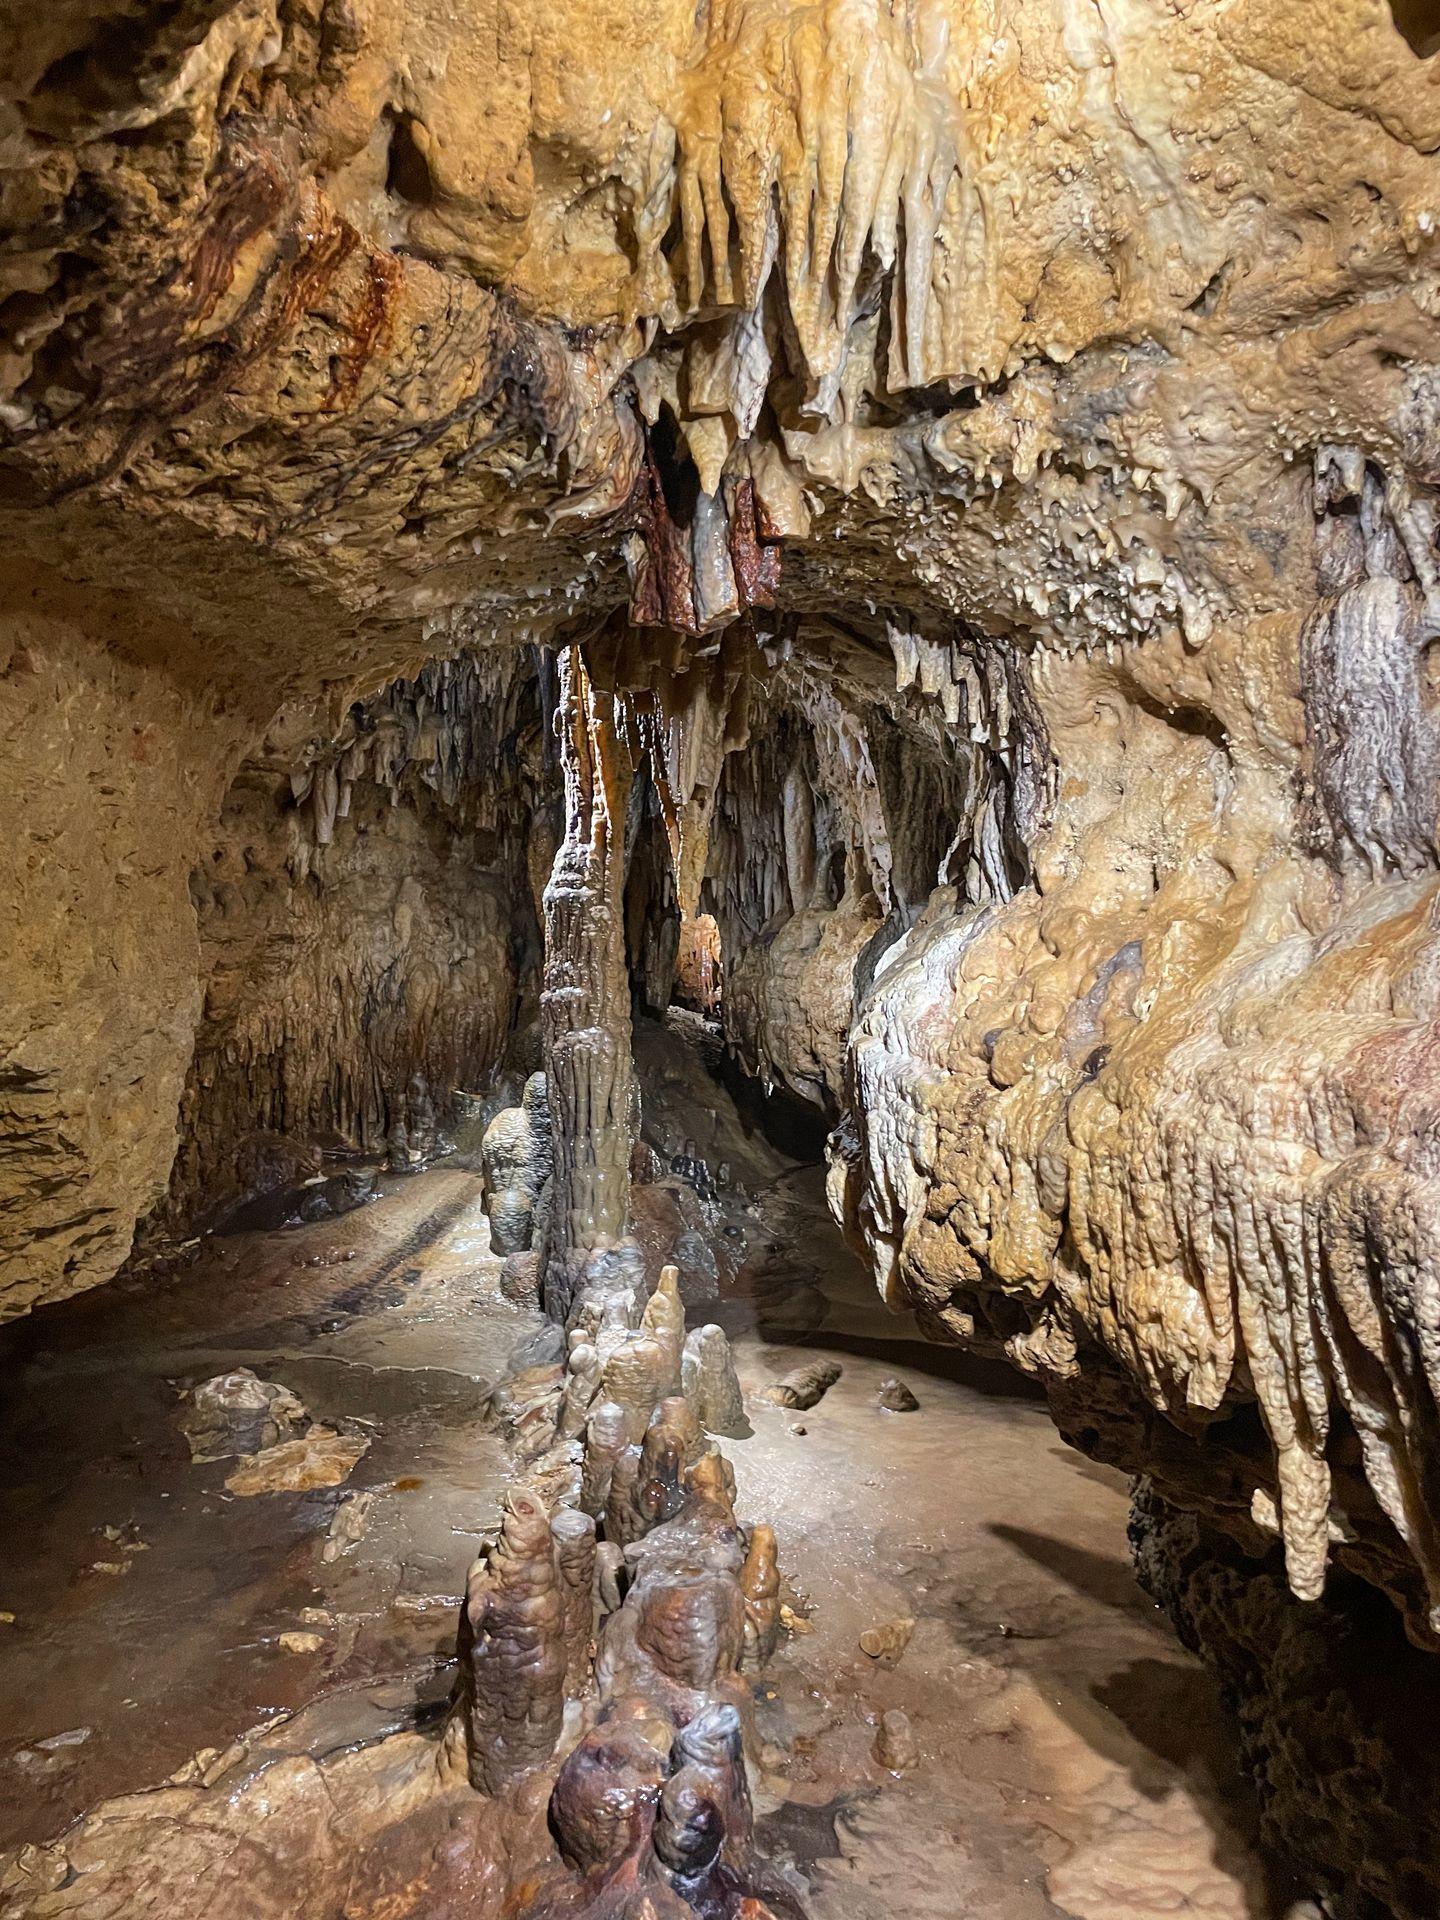 Stalactites and stalagmites meeting each other inside of Cave of the Mounds